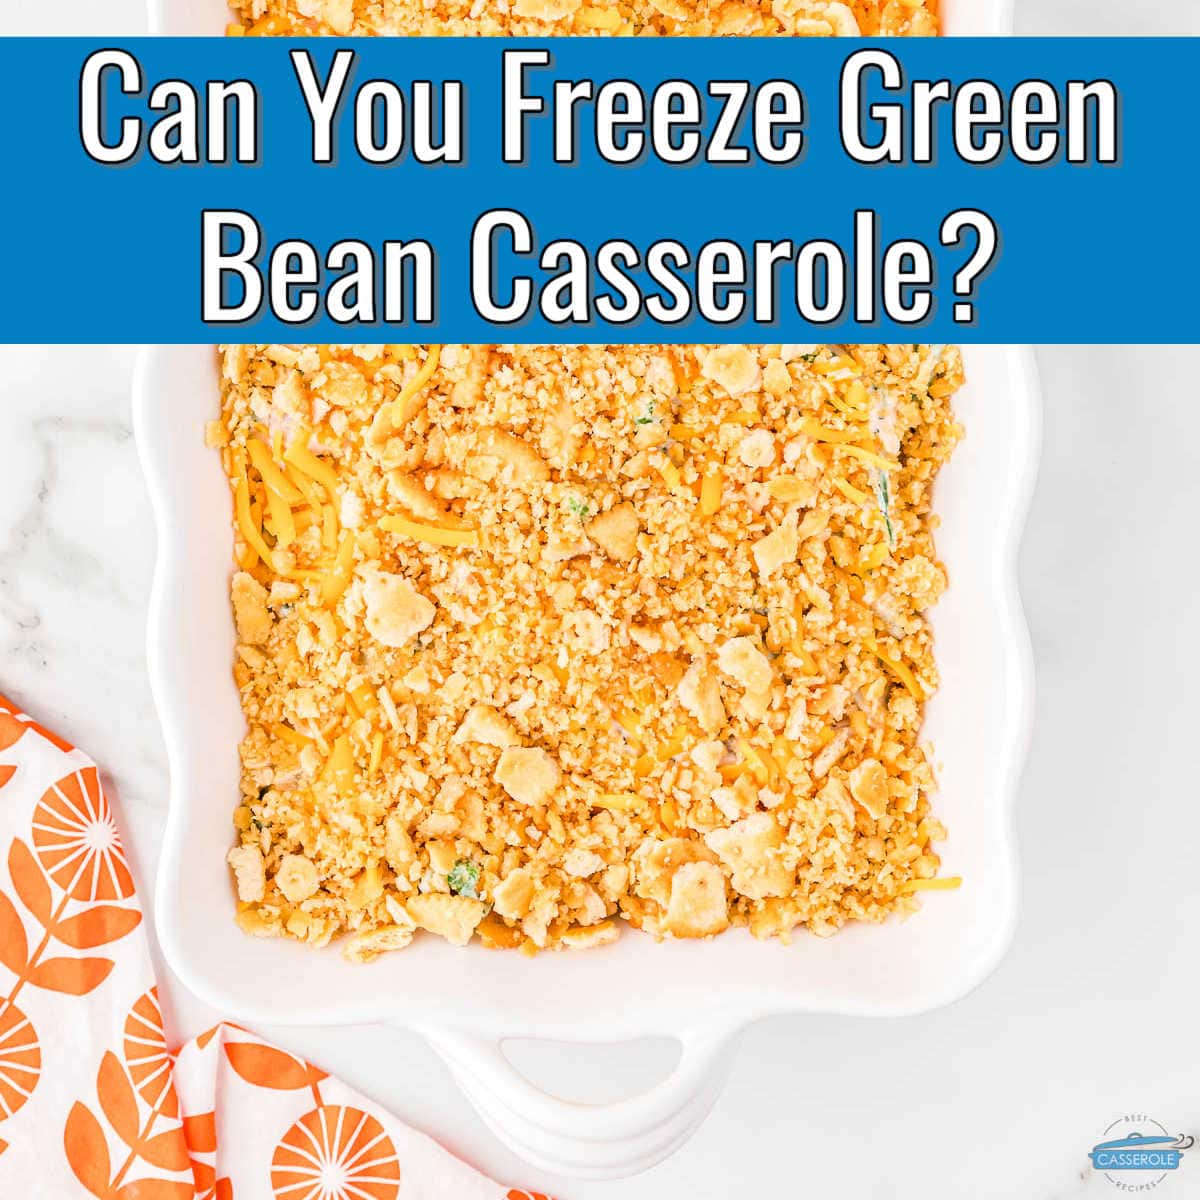 unbaked casserole with blue banner and text